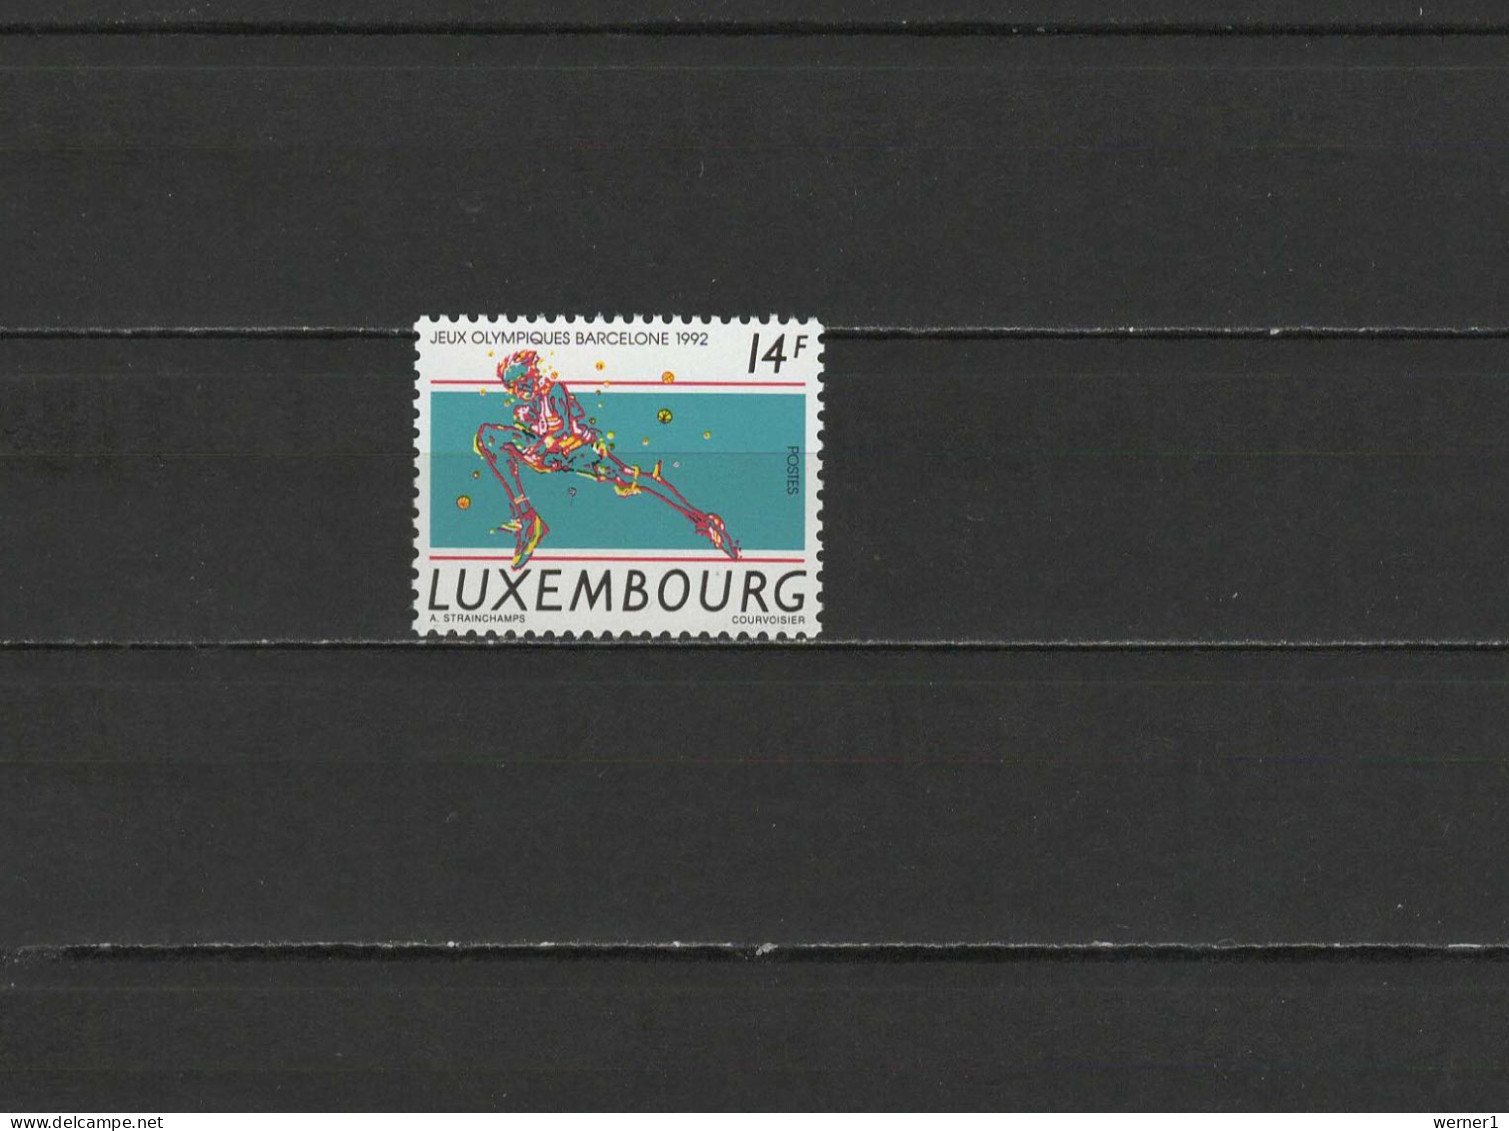 Luxemburg 1992 Olympic Games Barcelona Stamp MNH - Estate 1992: Barcellona